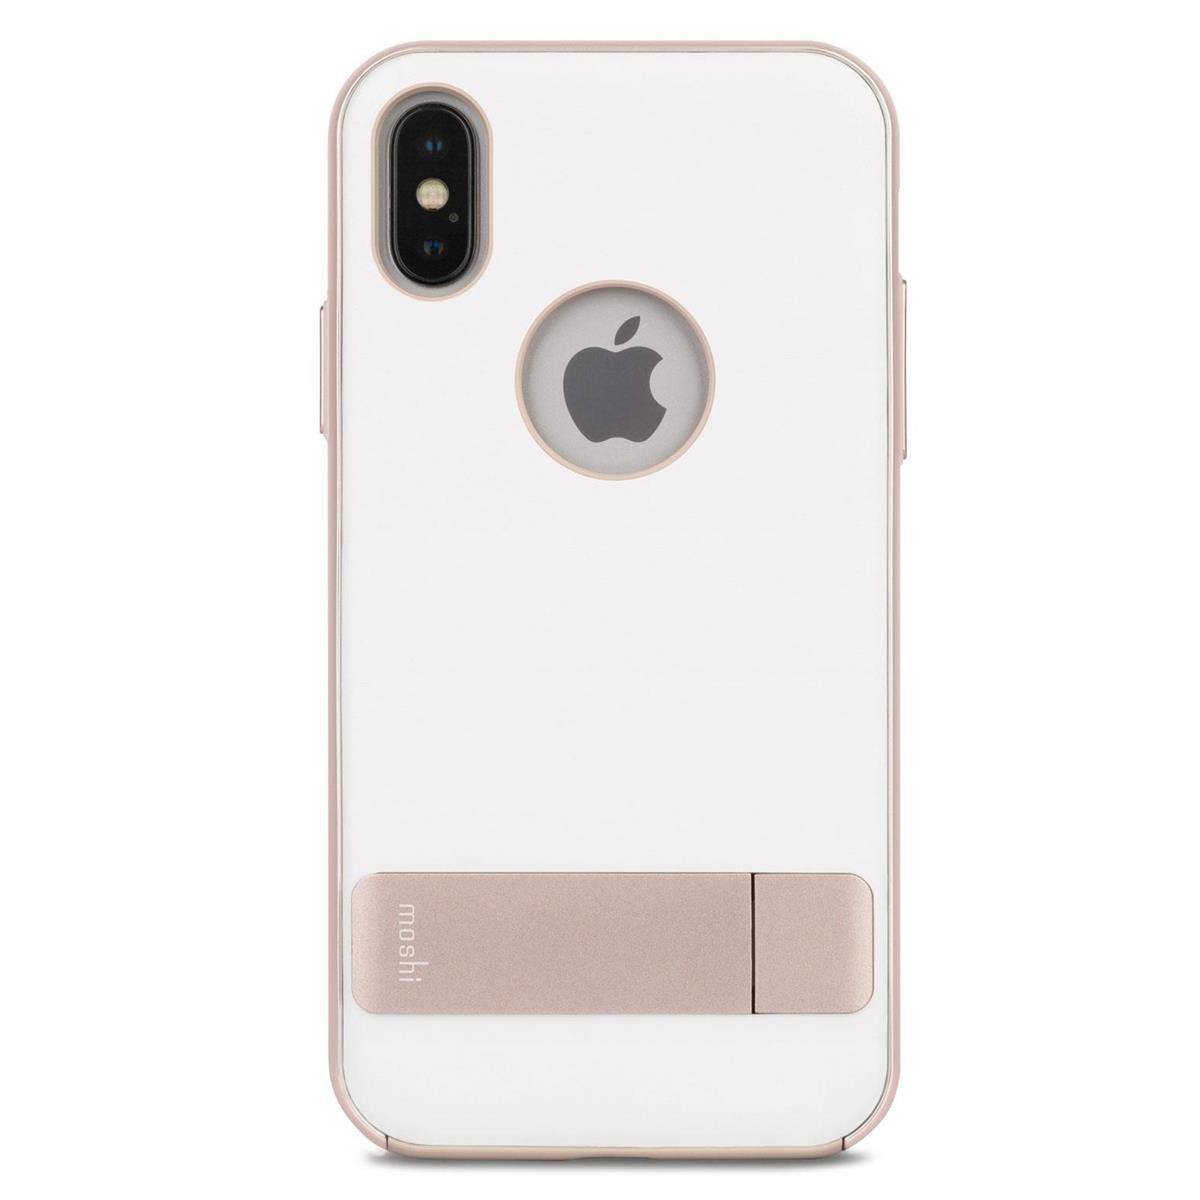 Image of Moshi Kameleon Kickstand Case for iPhone XS/X